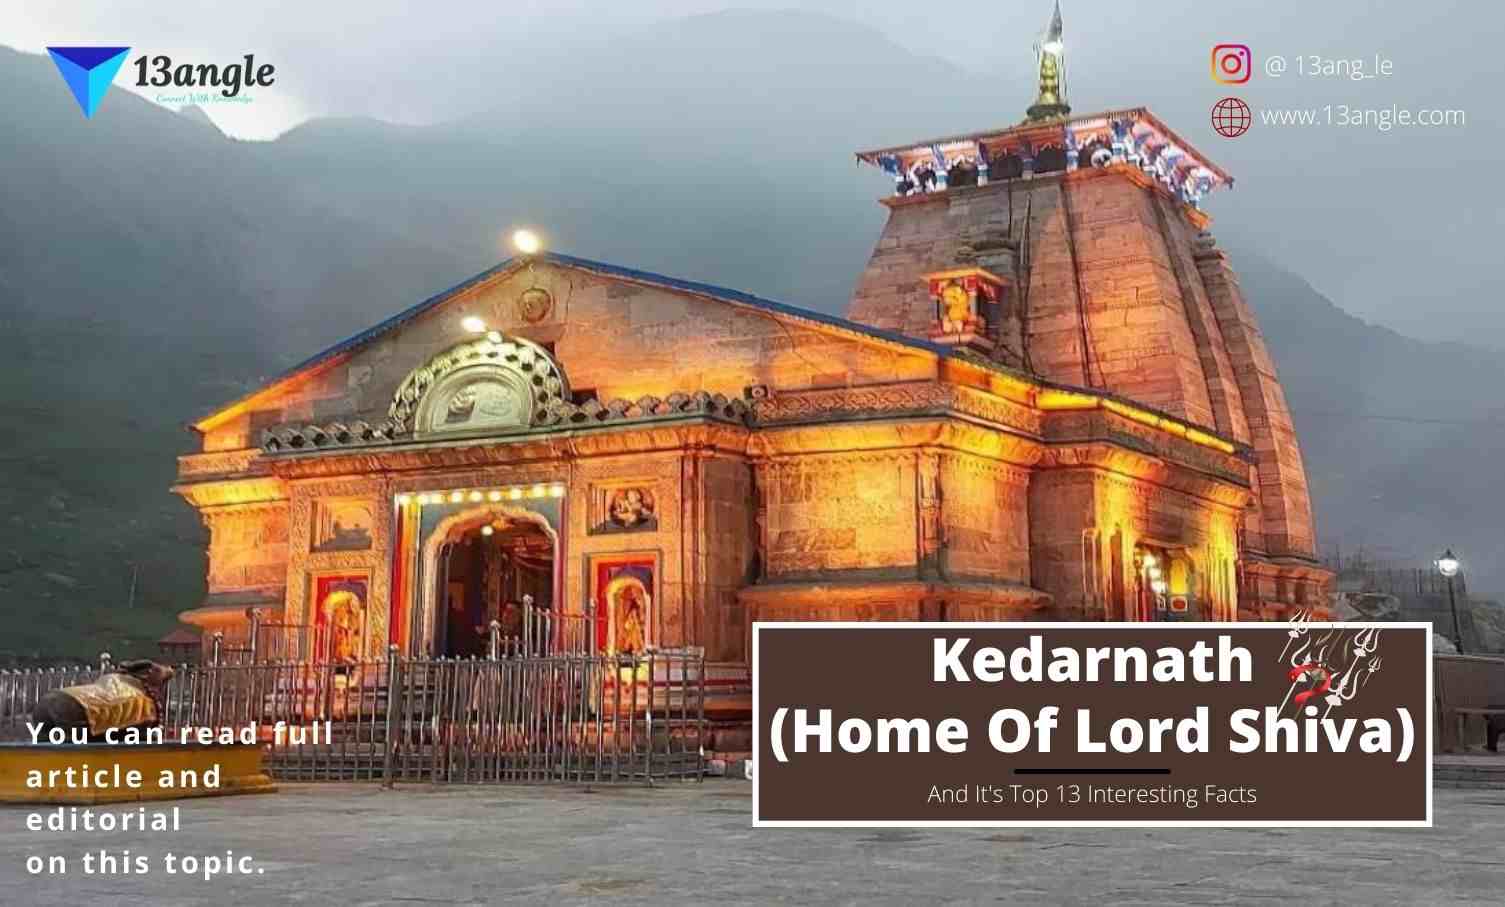 Kedarnath (Home Of Lord Shiva) And It's Top 13 Interesting Facts- 13angle.com